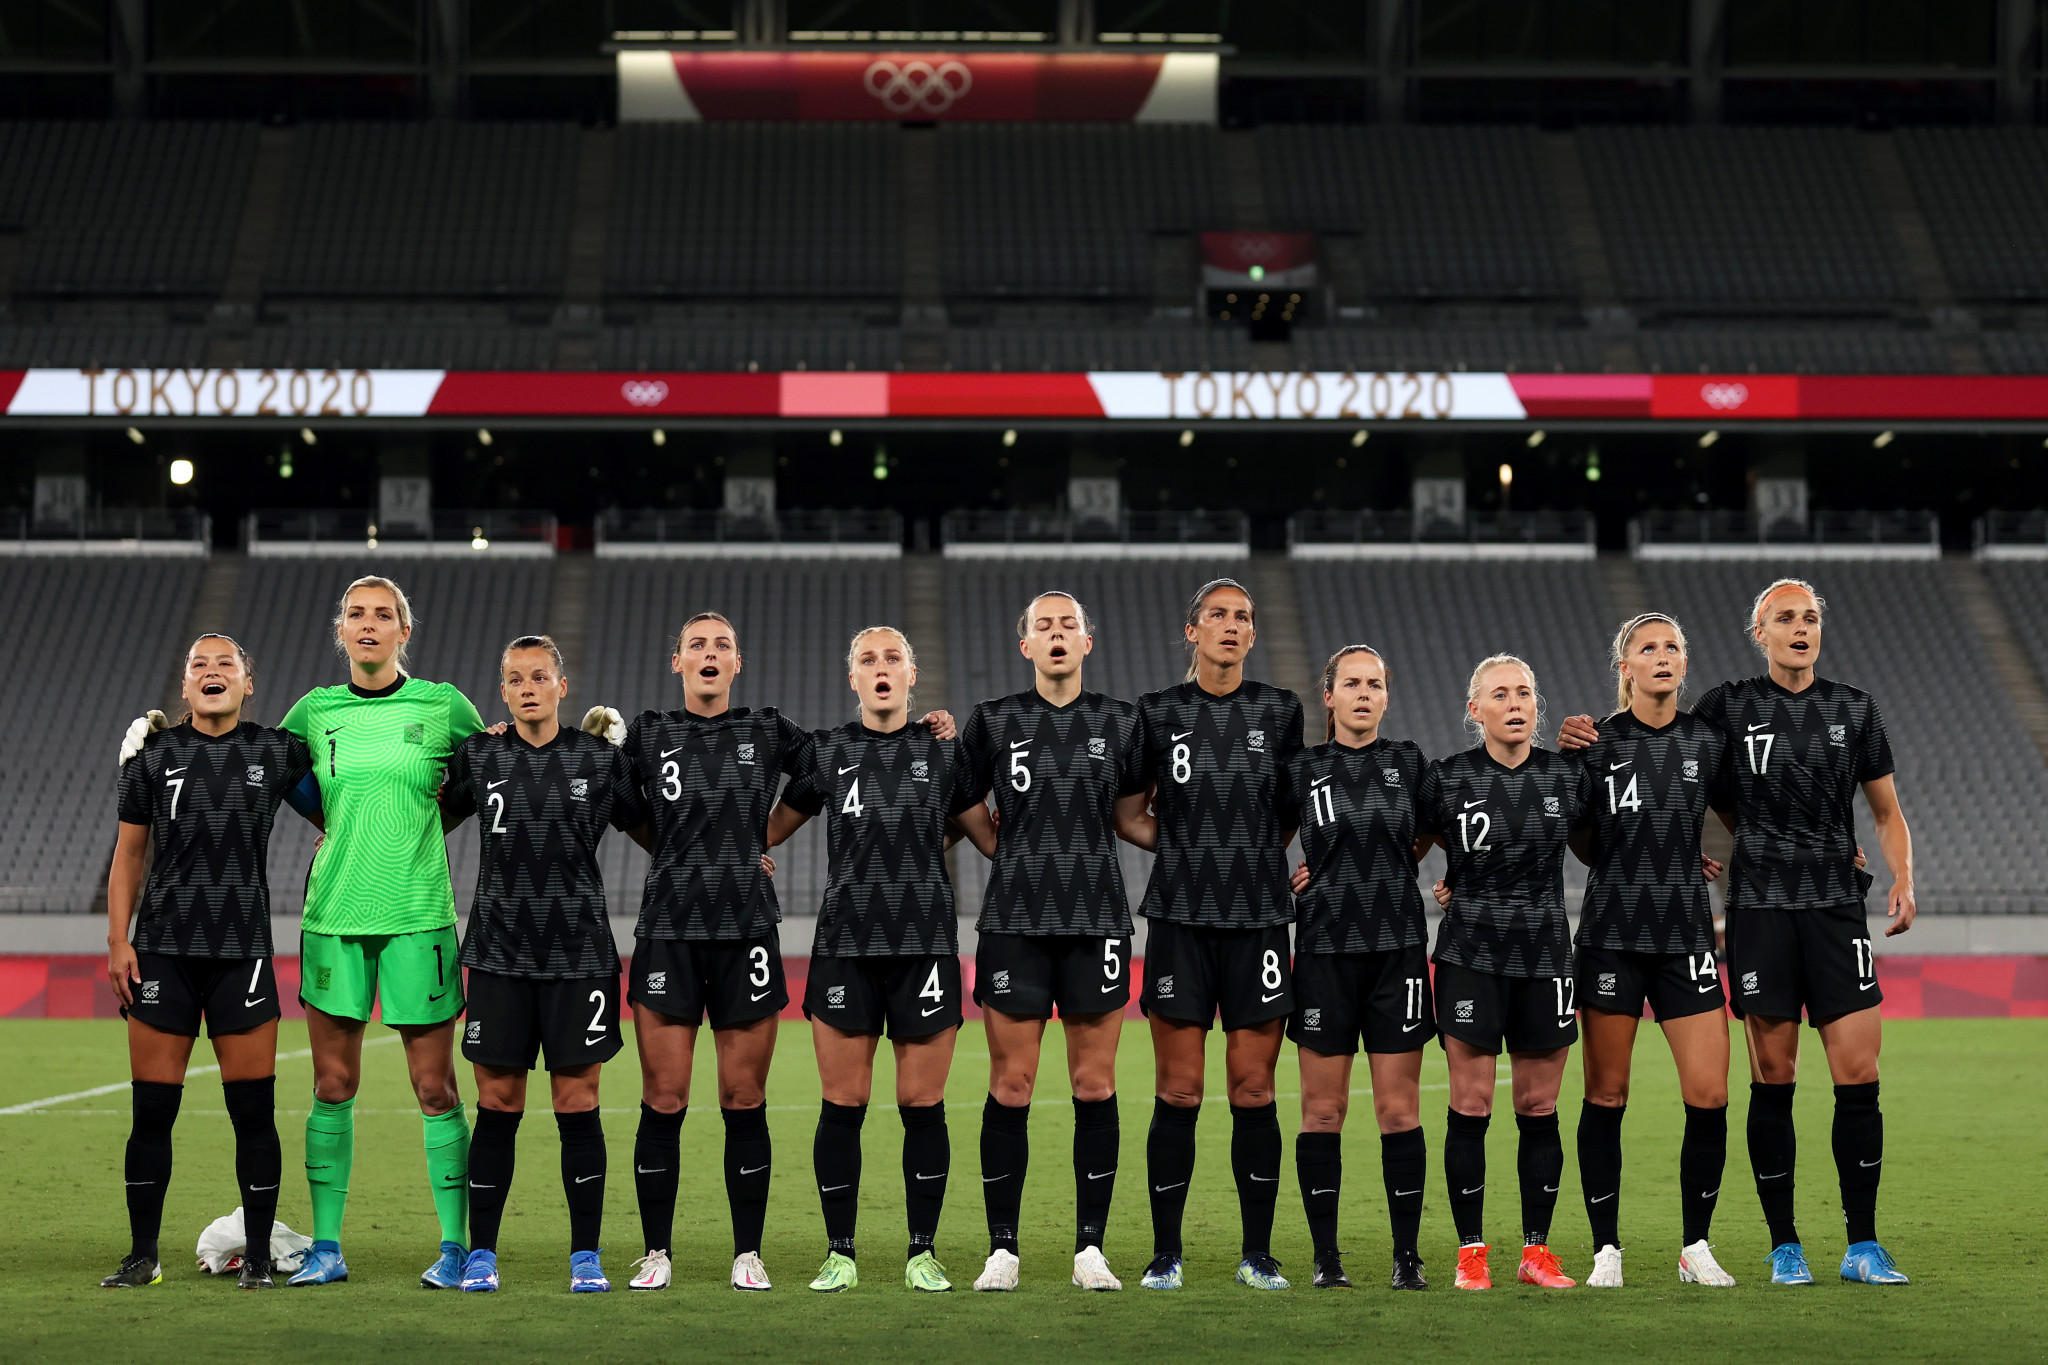 Reigning champions New Zealand are not playing in the OFC Women's Nations Cup ©Getty Images